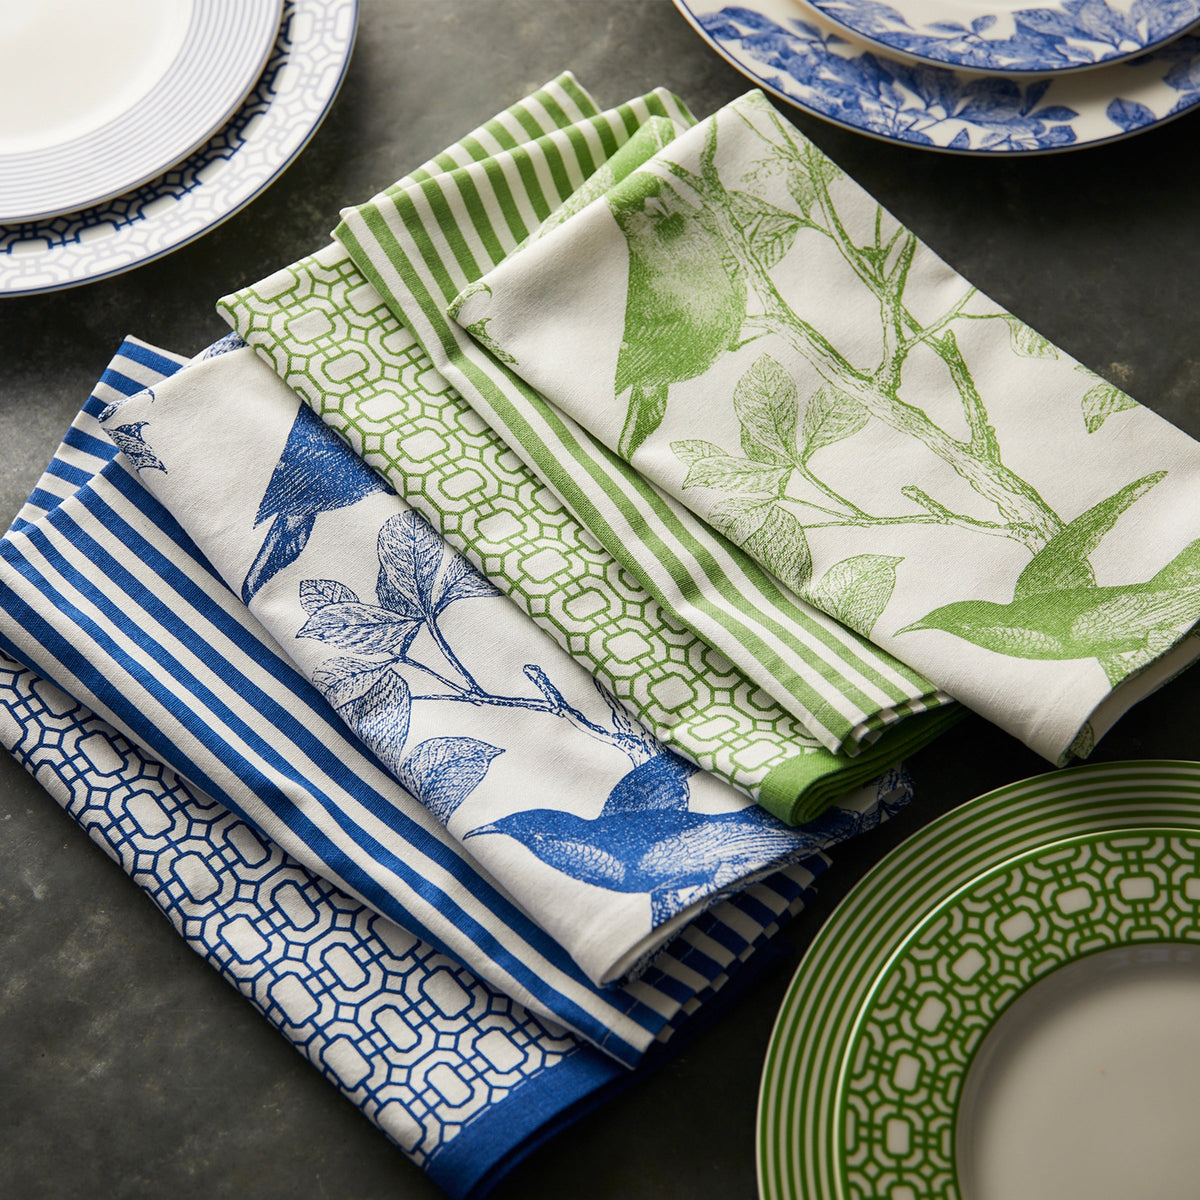 A set of Caskata Newport Garden Gate Dinner Napkins in Green Set/4 in blue and white on a table.